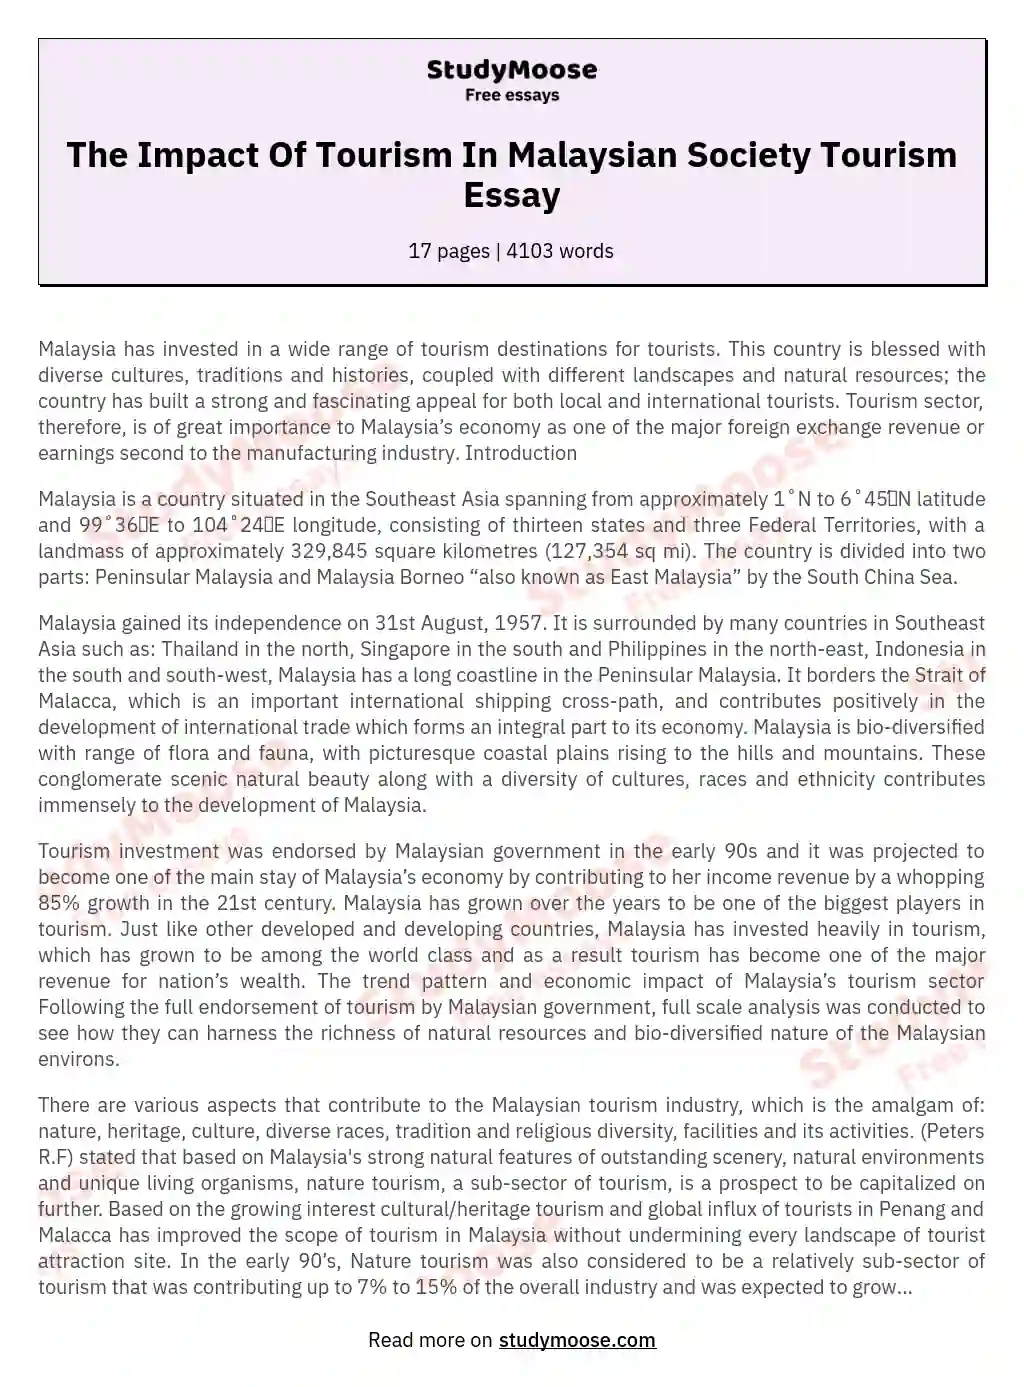 The Impact Of Tourism In Malaysian Society Tourism Essay